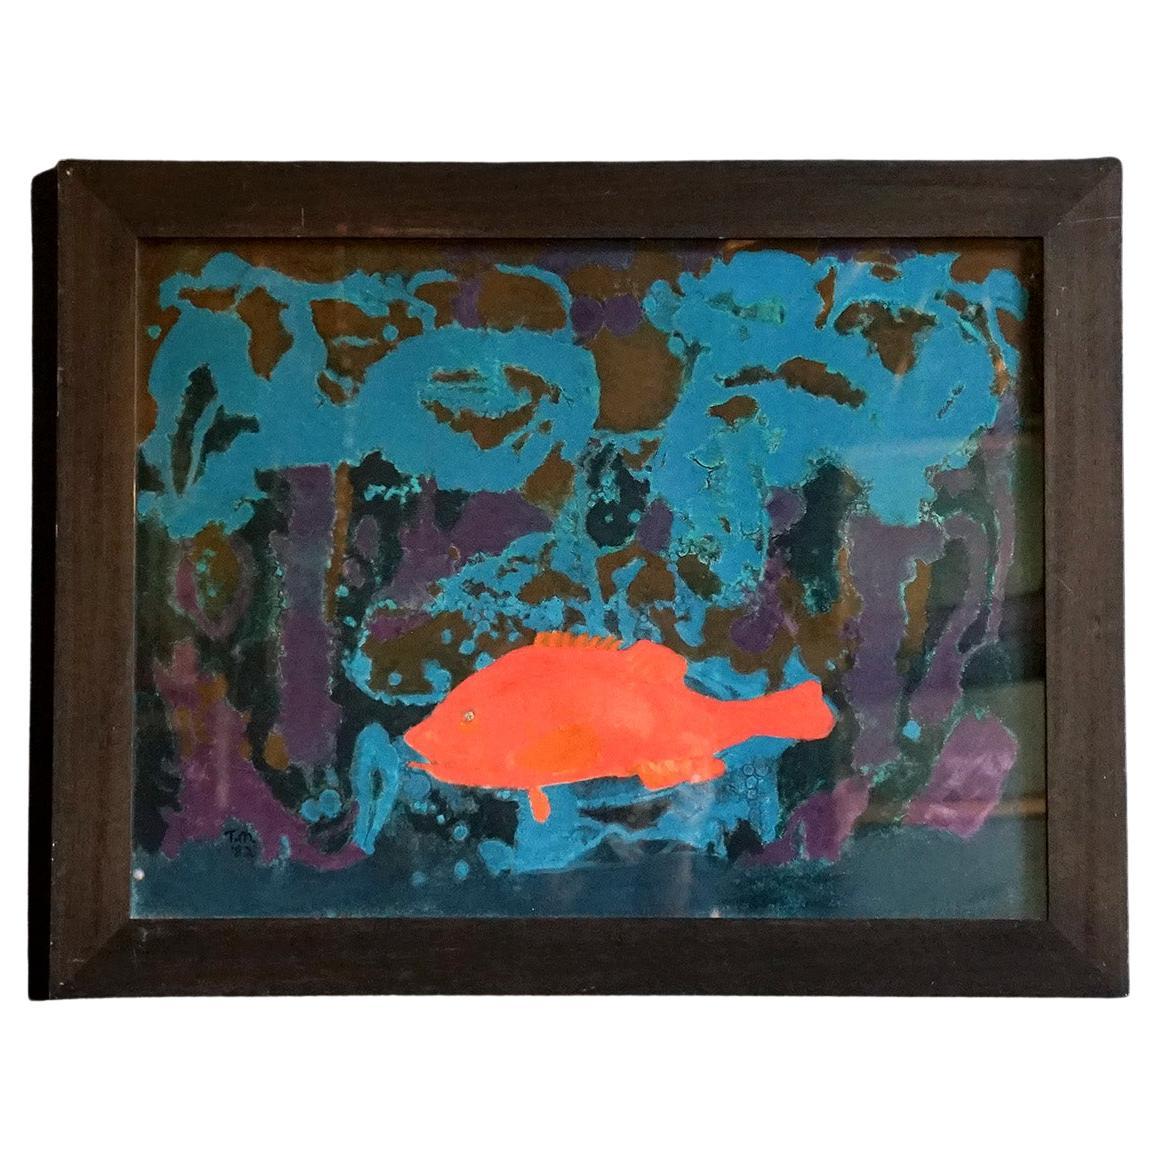 Vintage Expressionist Underwater Scene With Fish 1980s Original Acrylic Painting